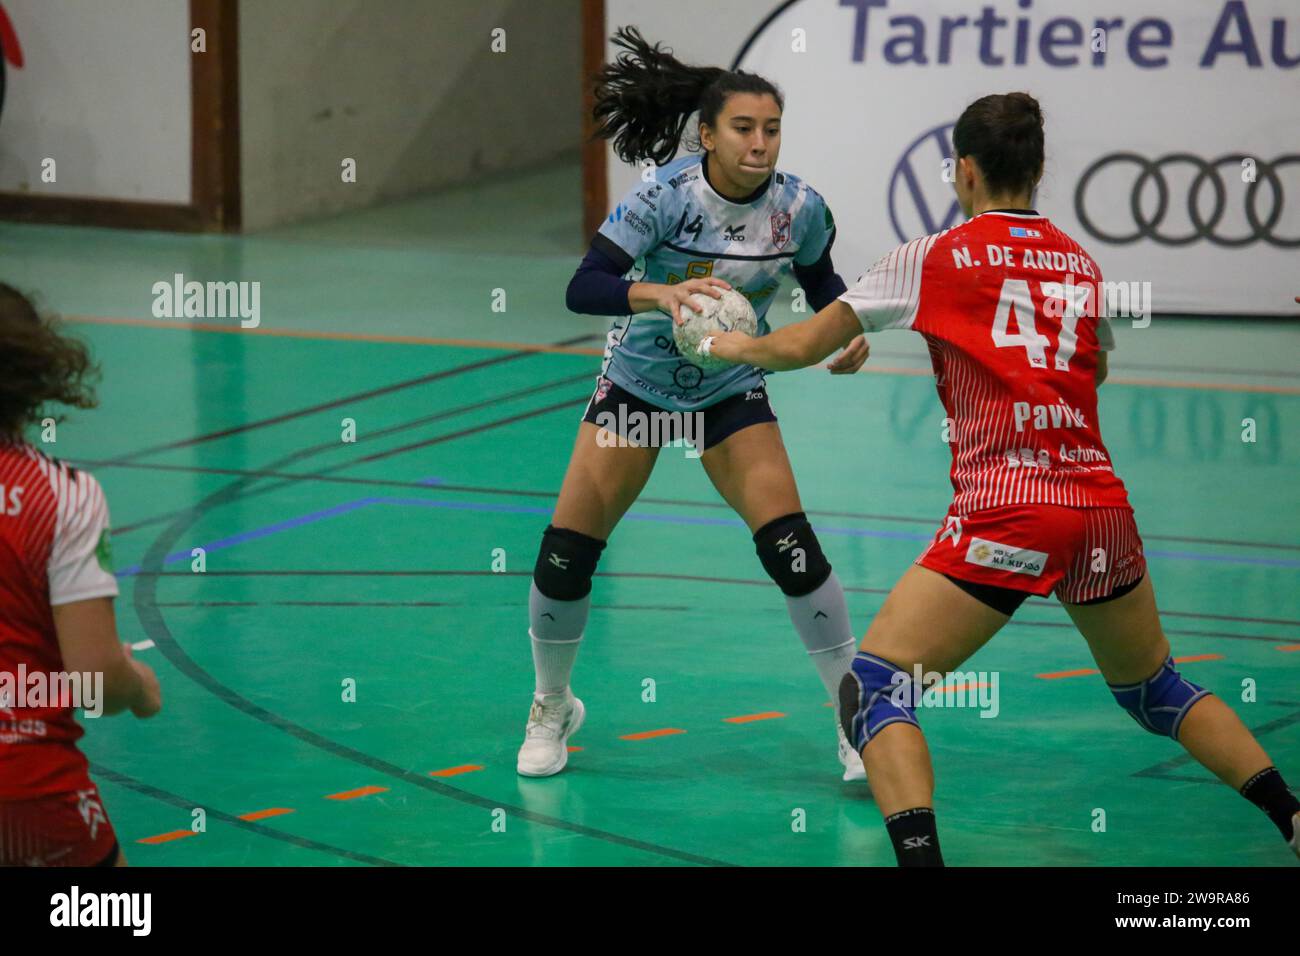 Gijon, Spain, 29th December, 2023: Mecalia Atletico Guardes player, Maria Paula Fernandez (14, L) with the ball against Nayla de Andres (47, R) during the 13th matchday of the Liga Guerreras Iberdrola 2023-24 between the Motive.co Gijon Balonmano La Calzada and Mecalia Atletico Guardes, on December 29, 2023, at the La Arena Pavilion, in Gijon, Spain. Credit: Alberto Brevers / Alamy Live News. Stock Photo